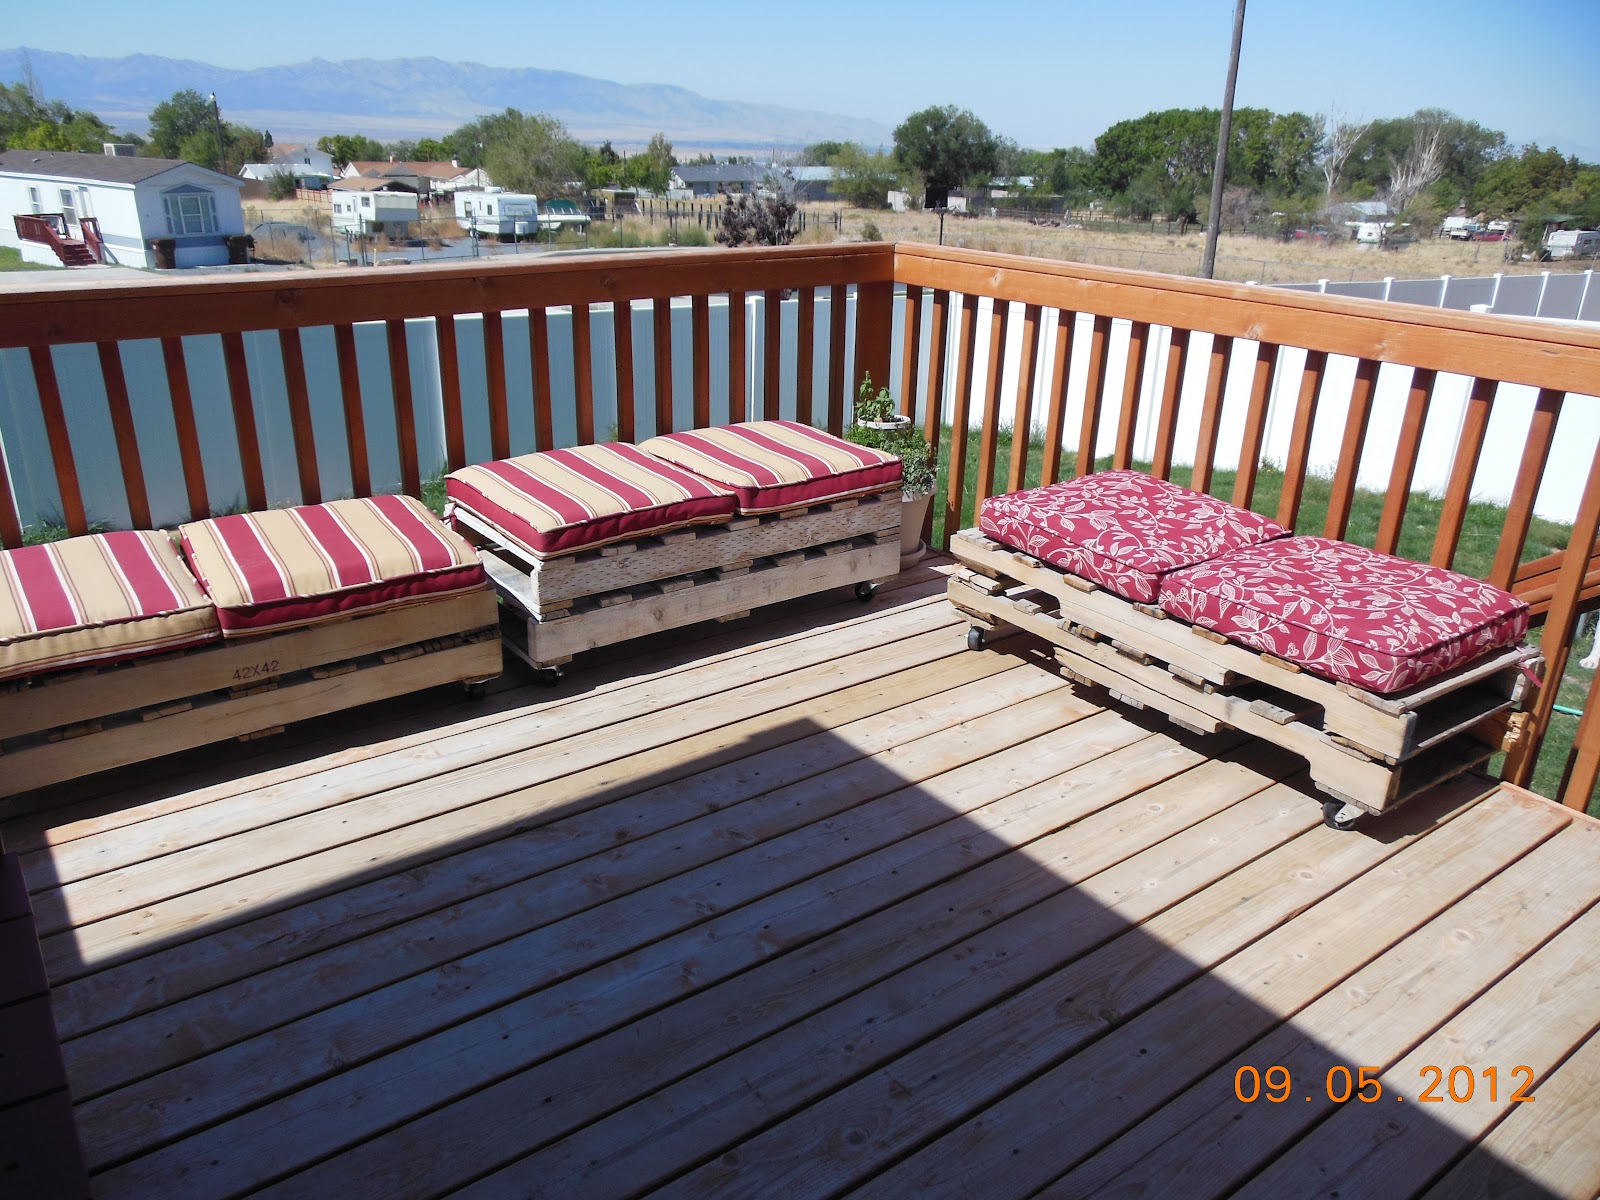 She desperately wanted some patio furniture. I had several pallets 